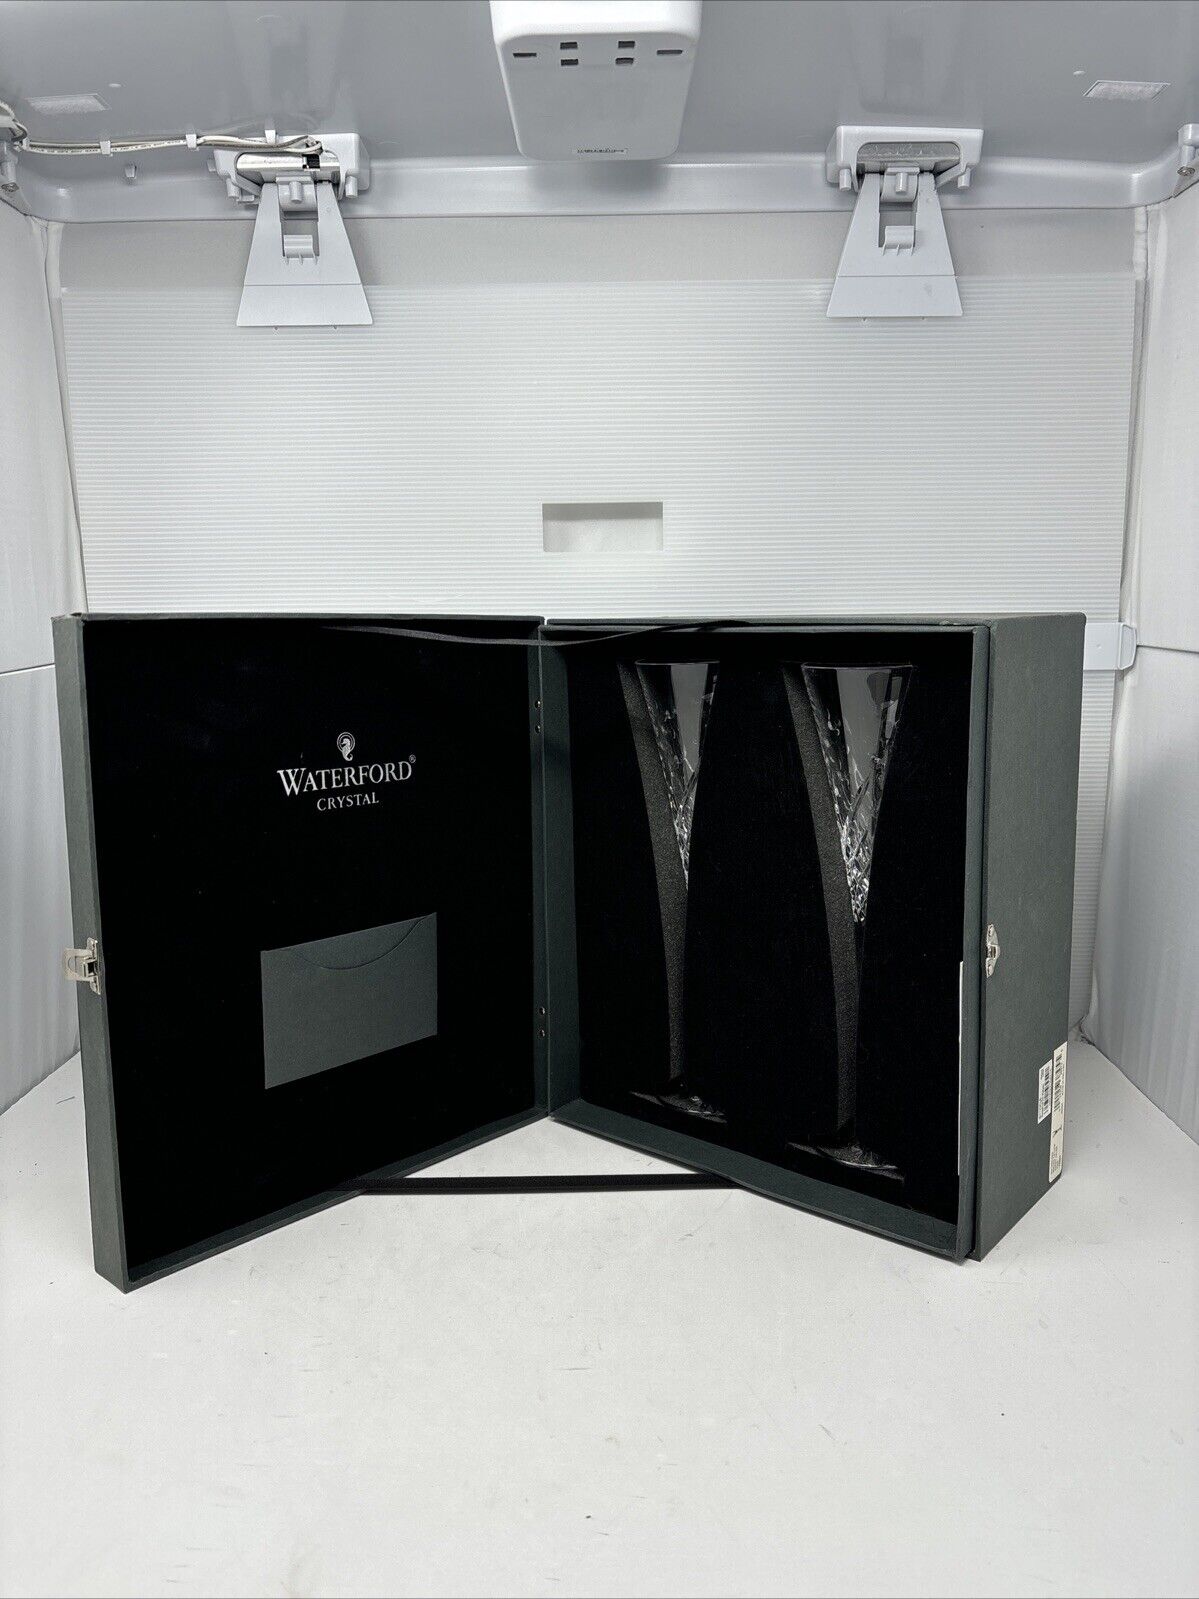 Waterford Crystal Wishes “Happy Celebrations” Set Of 2 Champagne Flutes Ireland 